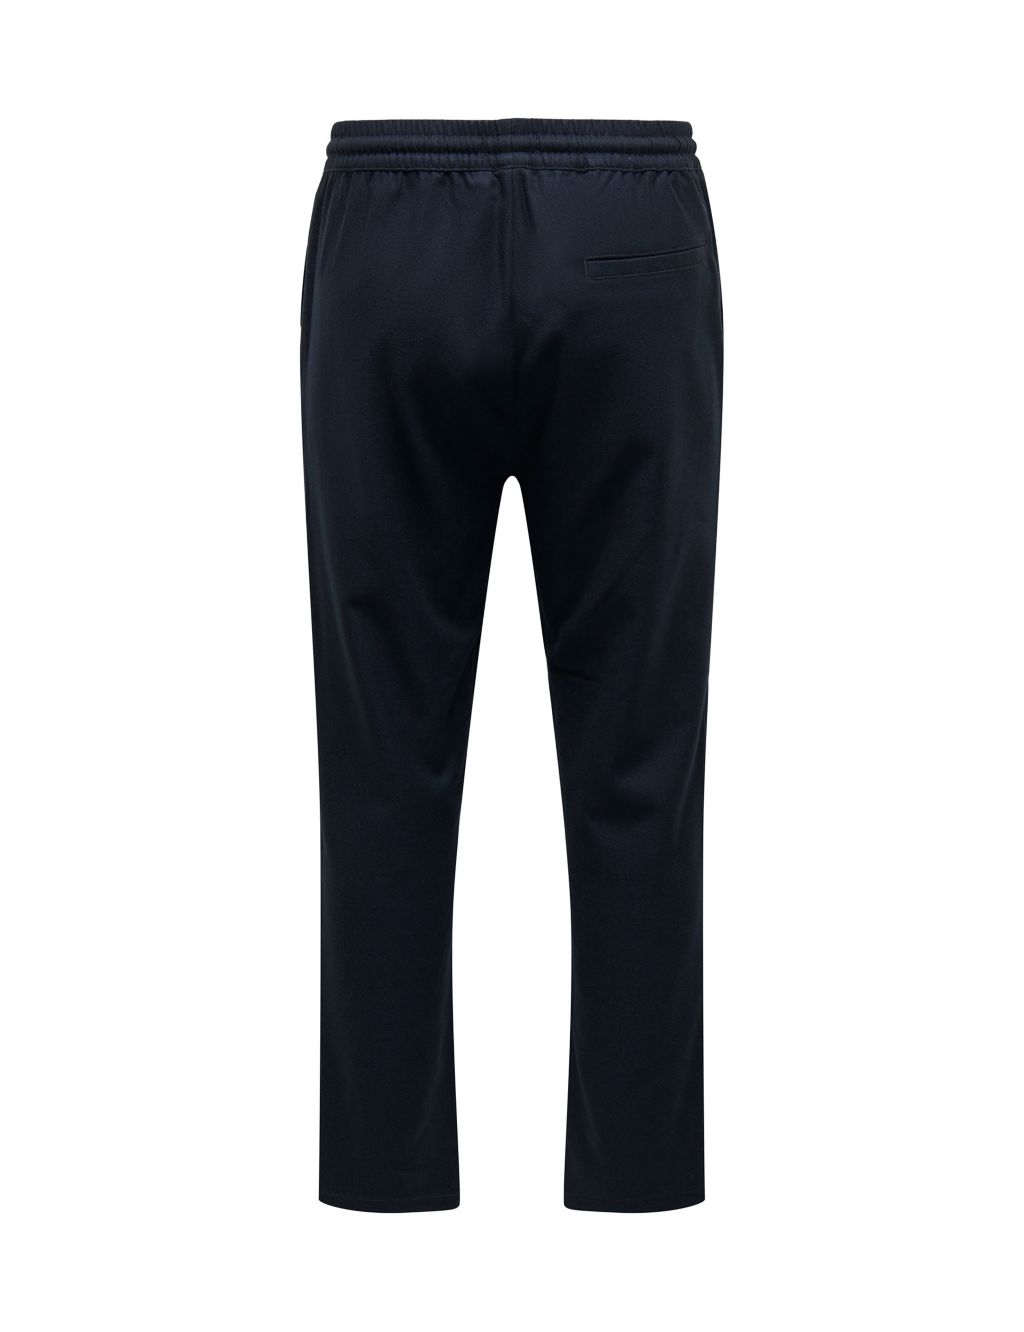 Tapered Fit Lightweight Trousers image 2